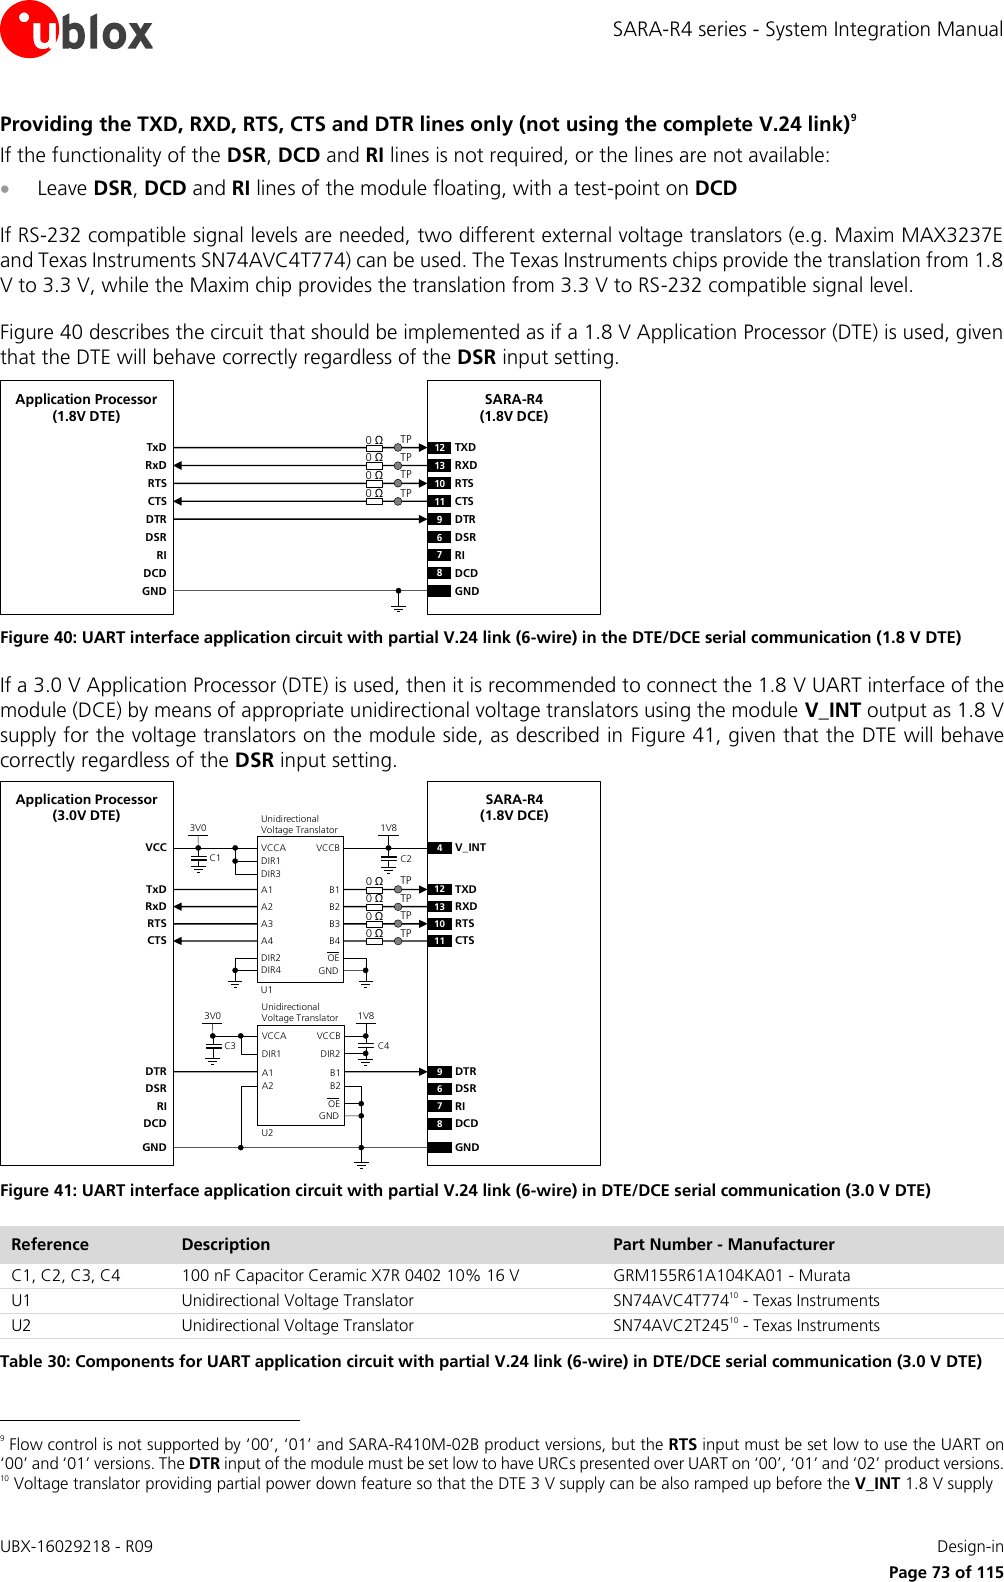 SARA-R4 series - System Integration Manual UBX-16029218 - R09    Design-in     Page 73 of 115 Providing the TXD, RXD, RTS, CTS and DTR lines only (not using the complete V.24 link)9 If the functionality of the DSR, DCD and RI lines is not required, or the lines are not available:  Leave DSR, DCD and RI lines of the module floating, with a test-point on DCD  If RS-232 compatible signal levels are needed, two different external voltage translators (e.g. Maxim MAX3237E and Texas Instruments SN74AVC4T774) can be used. The Texas Instruments chips provide the translation from 1.8 V to 3.3 V, while the Maxim chip provides the translation from 3.3 V to RS-232 compatible signal level.  Figure 40 describes the circuit that should be implemented as if a 1.8 V Application Processor (DTE) is used, given that the DTE will behave correctly regardless of the DSR input setting.  TxDApplication Processor(1.8V DTE)RxDRTSCTSDTRDSRRIDCDGNDSARA-R4(1.8V DCE)12 TXD9DTR13 RXD10 RTS11 CTS6DSR7RI8DCDGND0 Ω0 ΩTPTP0 Ω0 ΩTPTP Figure 40: UART interface application circuit with partial V.24 link (6-wire) in the DTE/DCE serial communication (1.8 V DTE) If a 3.0 V Application Processor (DTE) is used, then it is recommended to connect the 1.8 V UART interface of the module (DCE) by means of appropriate unidirectional voltage translators using the module V_INT output as 1.8 V supply for the voltage translators on the module side, as described in Figure 41, given that the DTE will behave correctly regardless of the DSR input setting.  4V_INTTxDApplication Processor(3.0V DTE)RxDRTSCTSDTRDSRRIDCDGNDSARA-R4(1.8V DCE)12 TXD9DTR13 RXD10 RTS11 CTS6DSR7RI8DCDGND0 Ω0 ΩTPTP0 Ω0 ΩTPTP1V8B1 A1GNDU1B3A3VCCBVCCAUnidirectionalVoltage TranslatorC1 C23V0DIR3DIR2 OEDIR1VCCB2 A2B4A4DIR41V8B1 A1GNDU2VCCBVCCAUnidirectionalVoltage TranslatorC33V0DIR1OEB2 A2DIR2 C4 Figure 41: UART interface application circuit with partial V.24 link (6-wire) in DTE/DCE serial communication (3.0 V DTE) Reference Description Part Number - Manufacturer C1, C2, C3, C4 100 nF Capacitor Ceramic X7R 0402 10% 16 V GRM155R61A104KA01 - Murata U1 Unidirectional Voltage Translator SN74AVC4T77410 - Texas Instruments U2 Unidirectional Voltage Translator SN74AVC2T24510 - Texas Instruments Table 30: Components for UART application circuit with partial V.24 link (6-wire) in DTE/DCE serial communication (3.0 V DTE)                                                       9 Flow control is not supported by ‘00’, ‘01’ and SARA-R410M-02B product versions, but the RTS input must be set low to use the UART on ‘00’ and ‘01’ versions. The DTR input of the module must be set low to have URCs presented over UART on ‘00’, ‘01’ and ‘02’ product versions. 10 Voltage translator providing partial power down feature so that the DTE 3 V supply can be also ramped up before the V_INT 1.8 V supply 